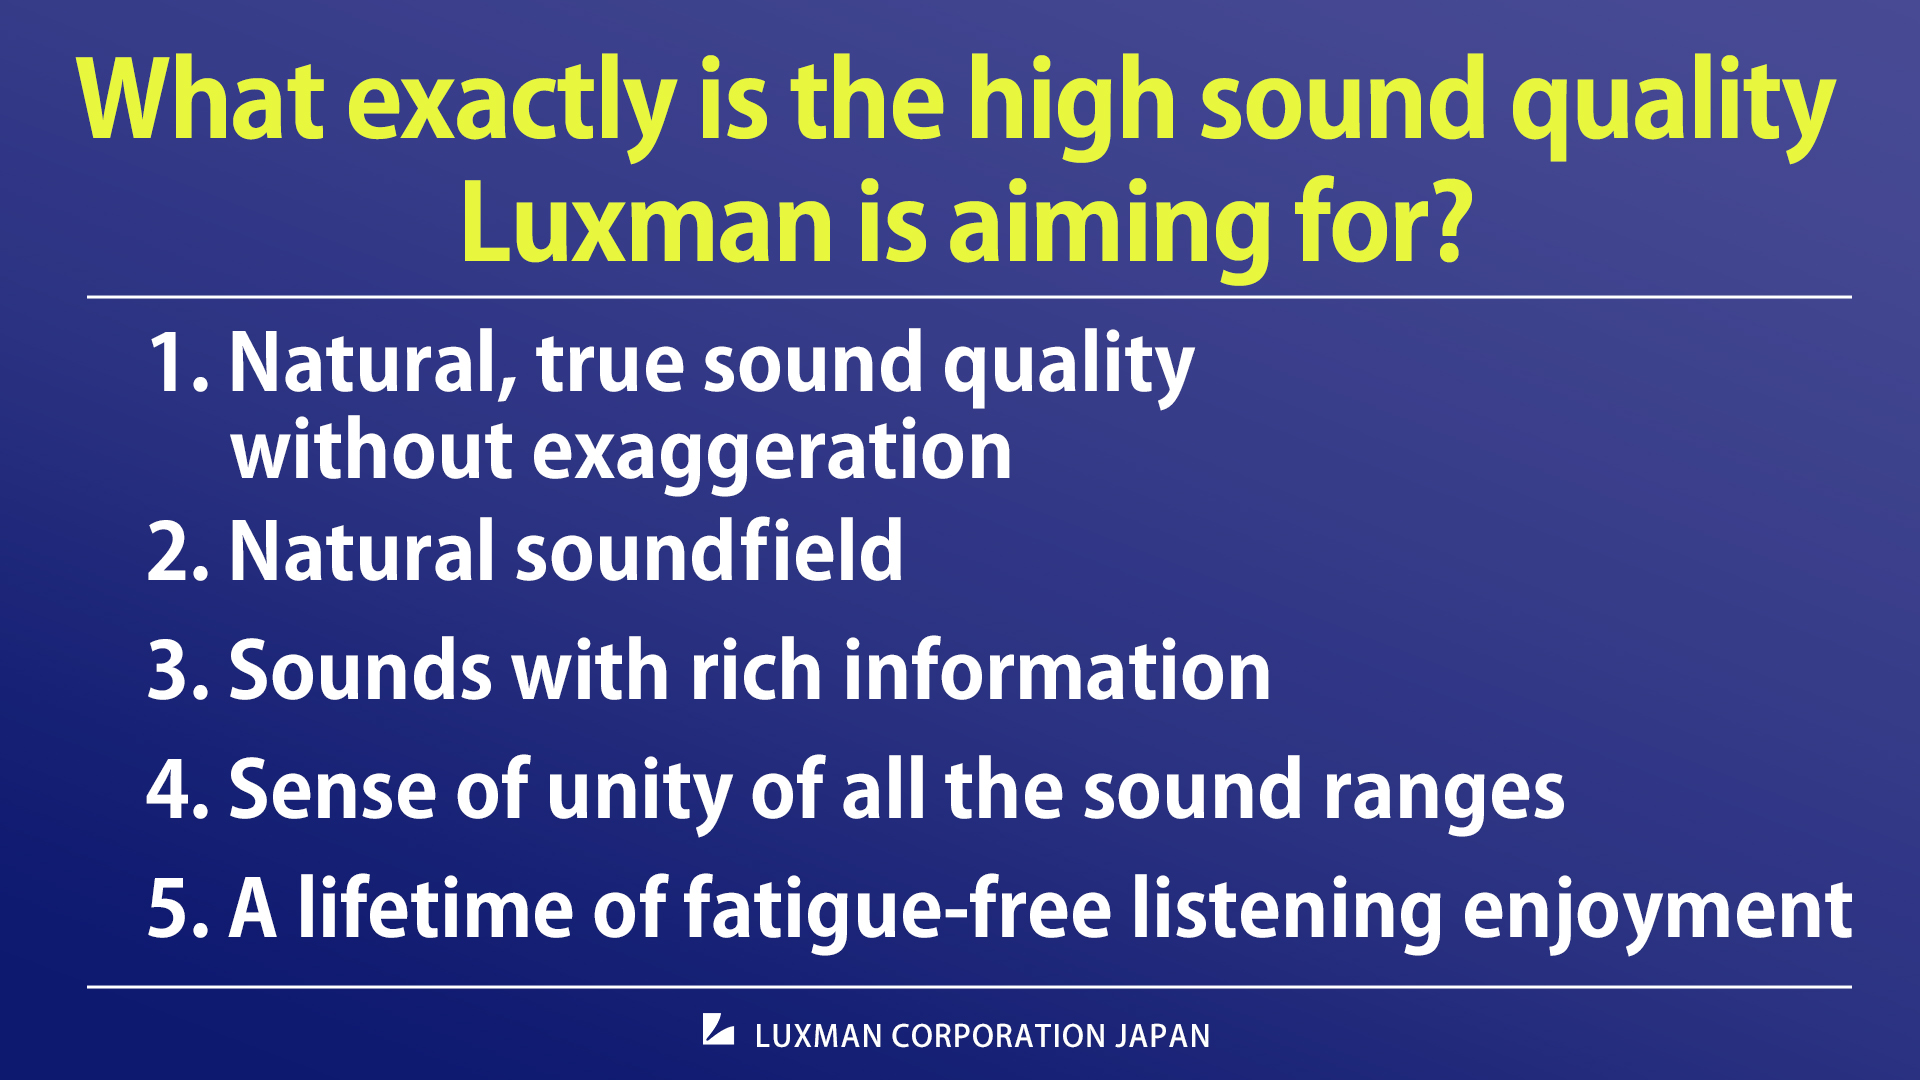 What exactly is the high sound quality Luxman is aiming for?